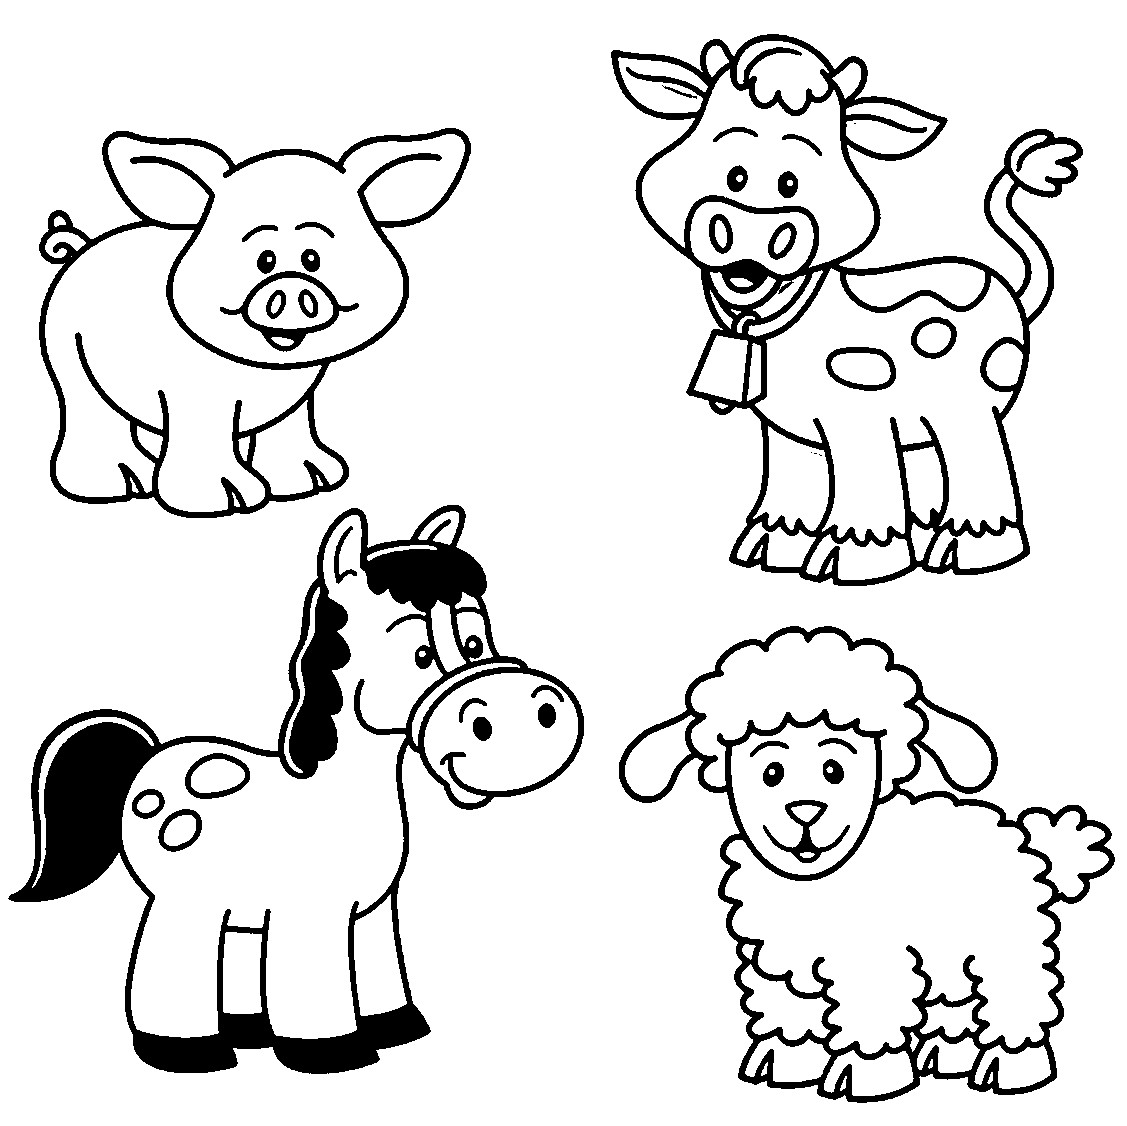 Baby Farm Animal Coloring Pages
 Baby Farm Animal Coloring Pages